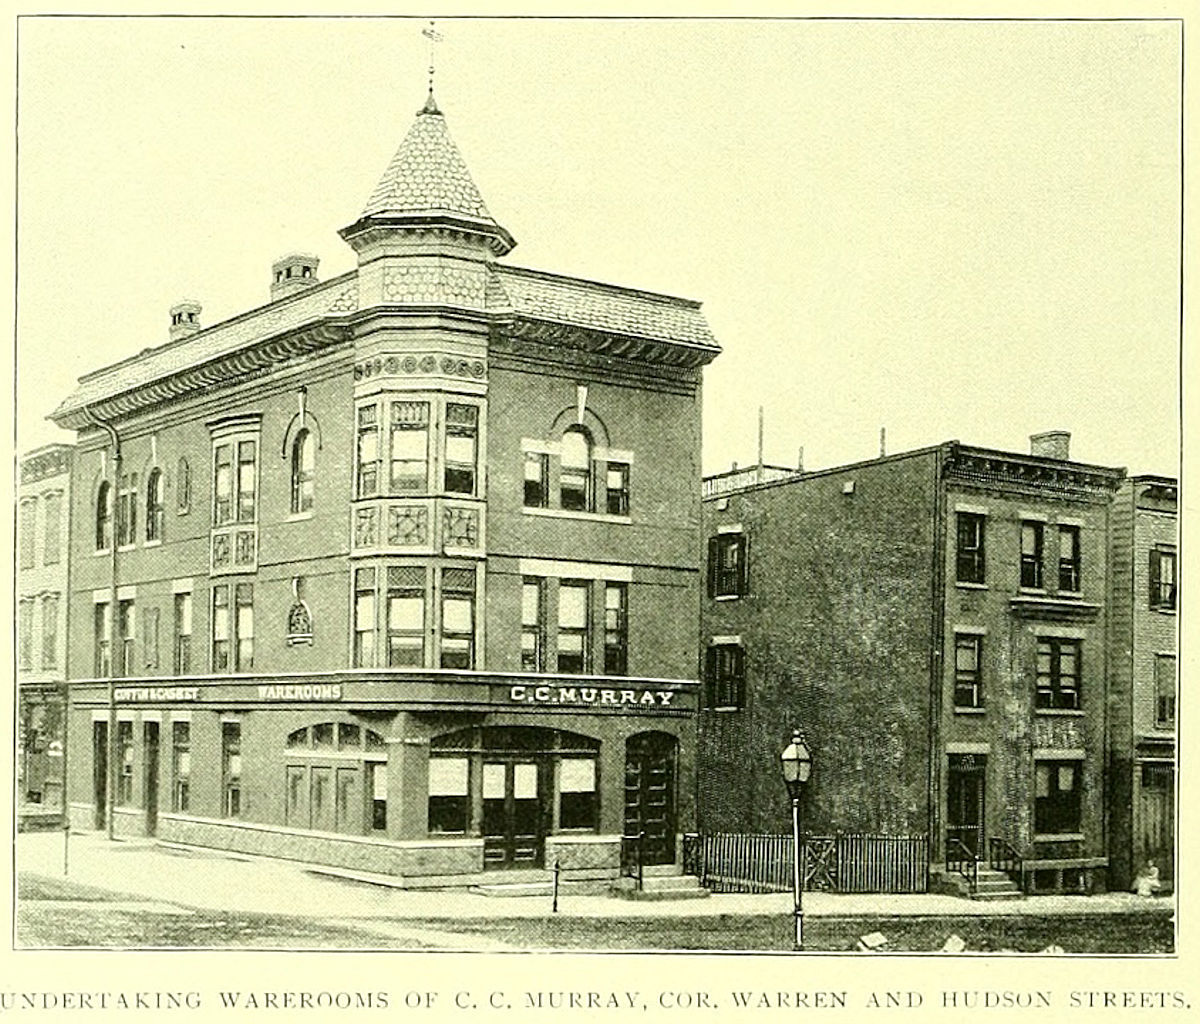 Hudson & Warren Streets
Photo from Essex County Illustrated 1897
